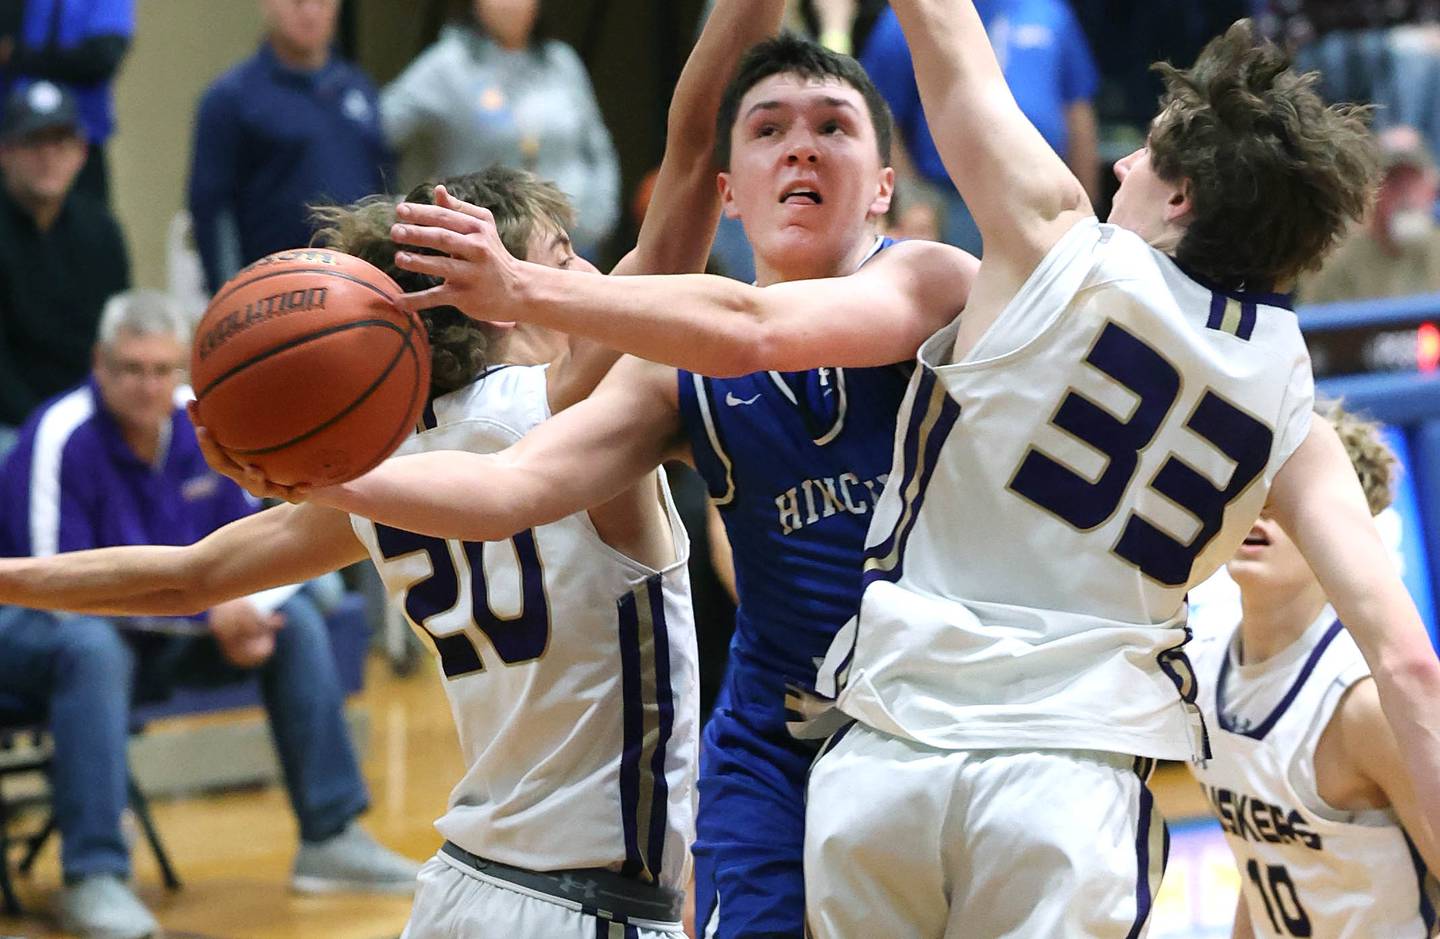 Hinckley-Big Rock's Ben Hintzsche goes to the basket between Serena's Bradley Armour (left) and Hunter Staton Friday, Feb. 3, 2023, during the championship game of the Little 10 Conference Basketball Tournament at Somonauk High School.